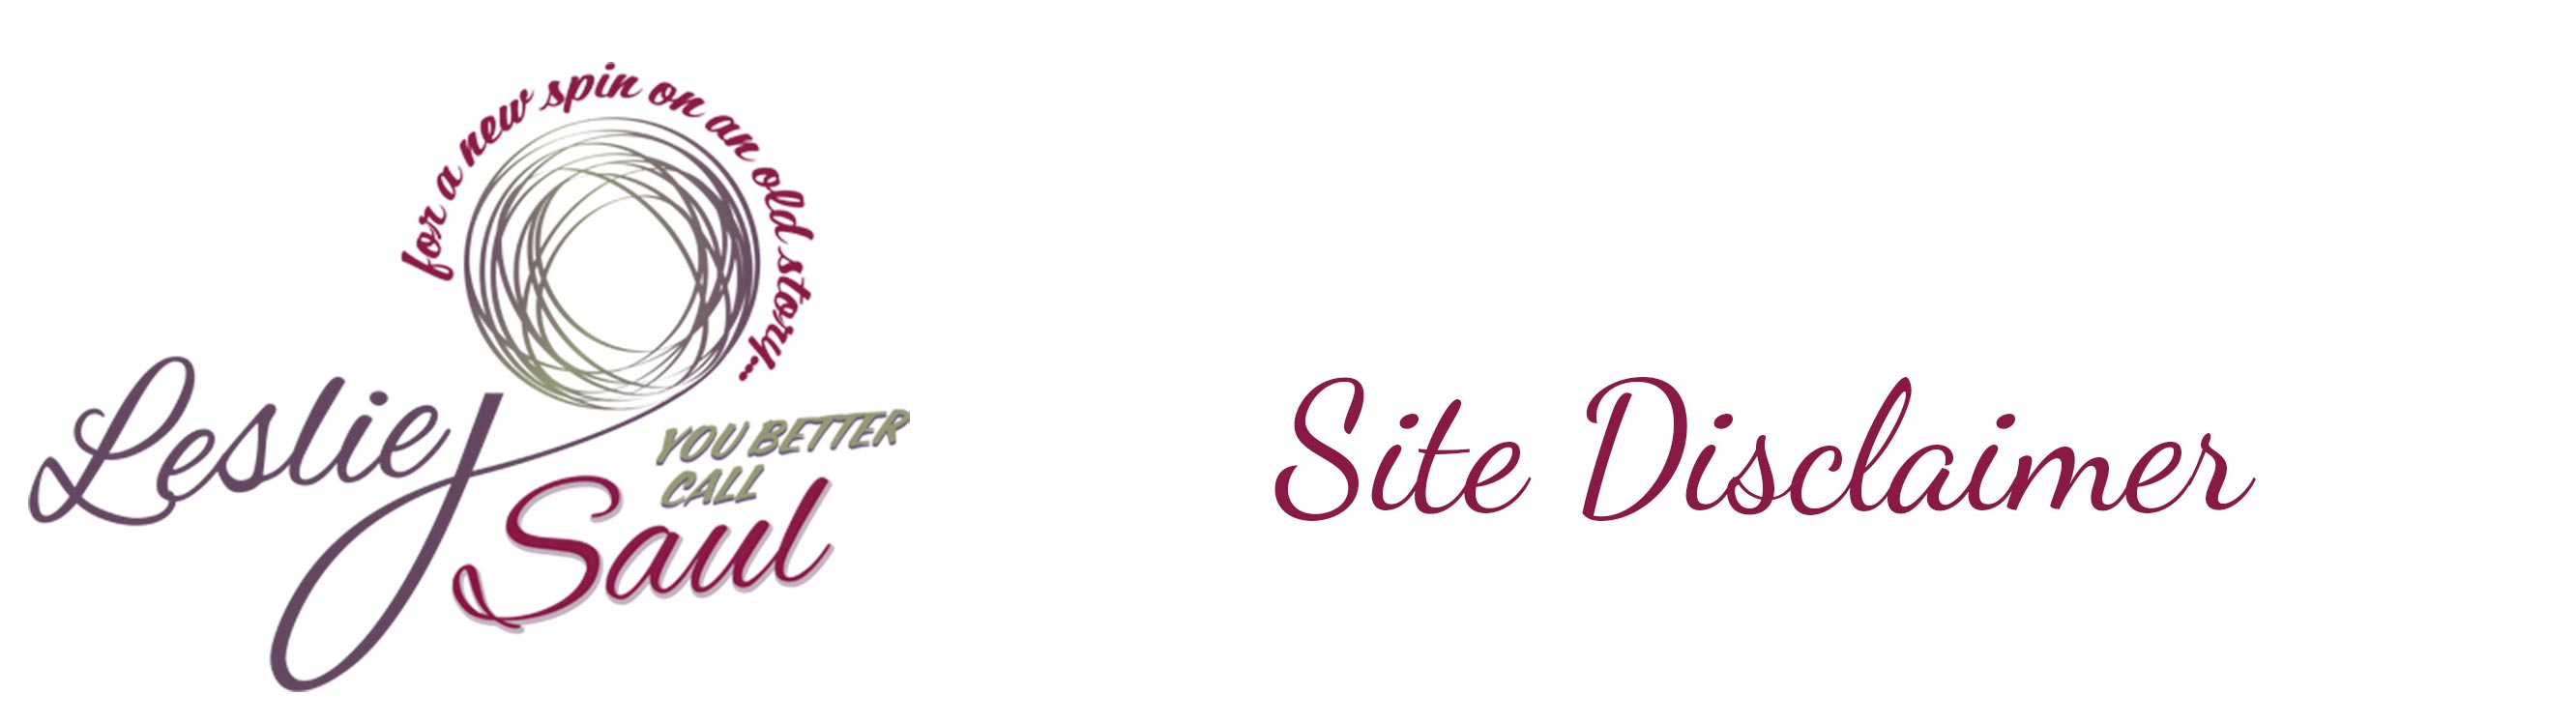 Site Disclaimer